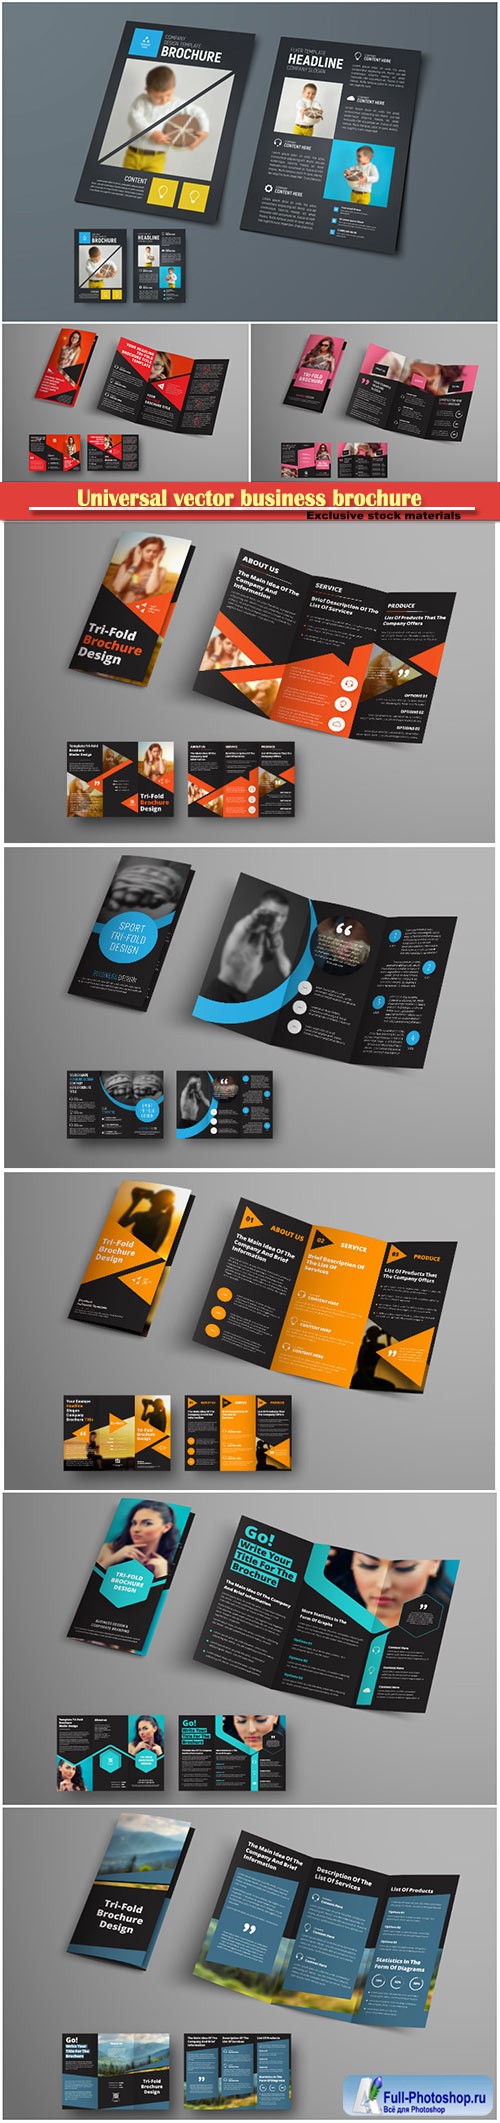 Template of a universal vector business brochure with square and triangular elements and a place for a photo